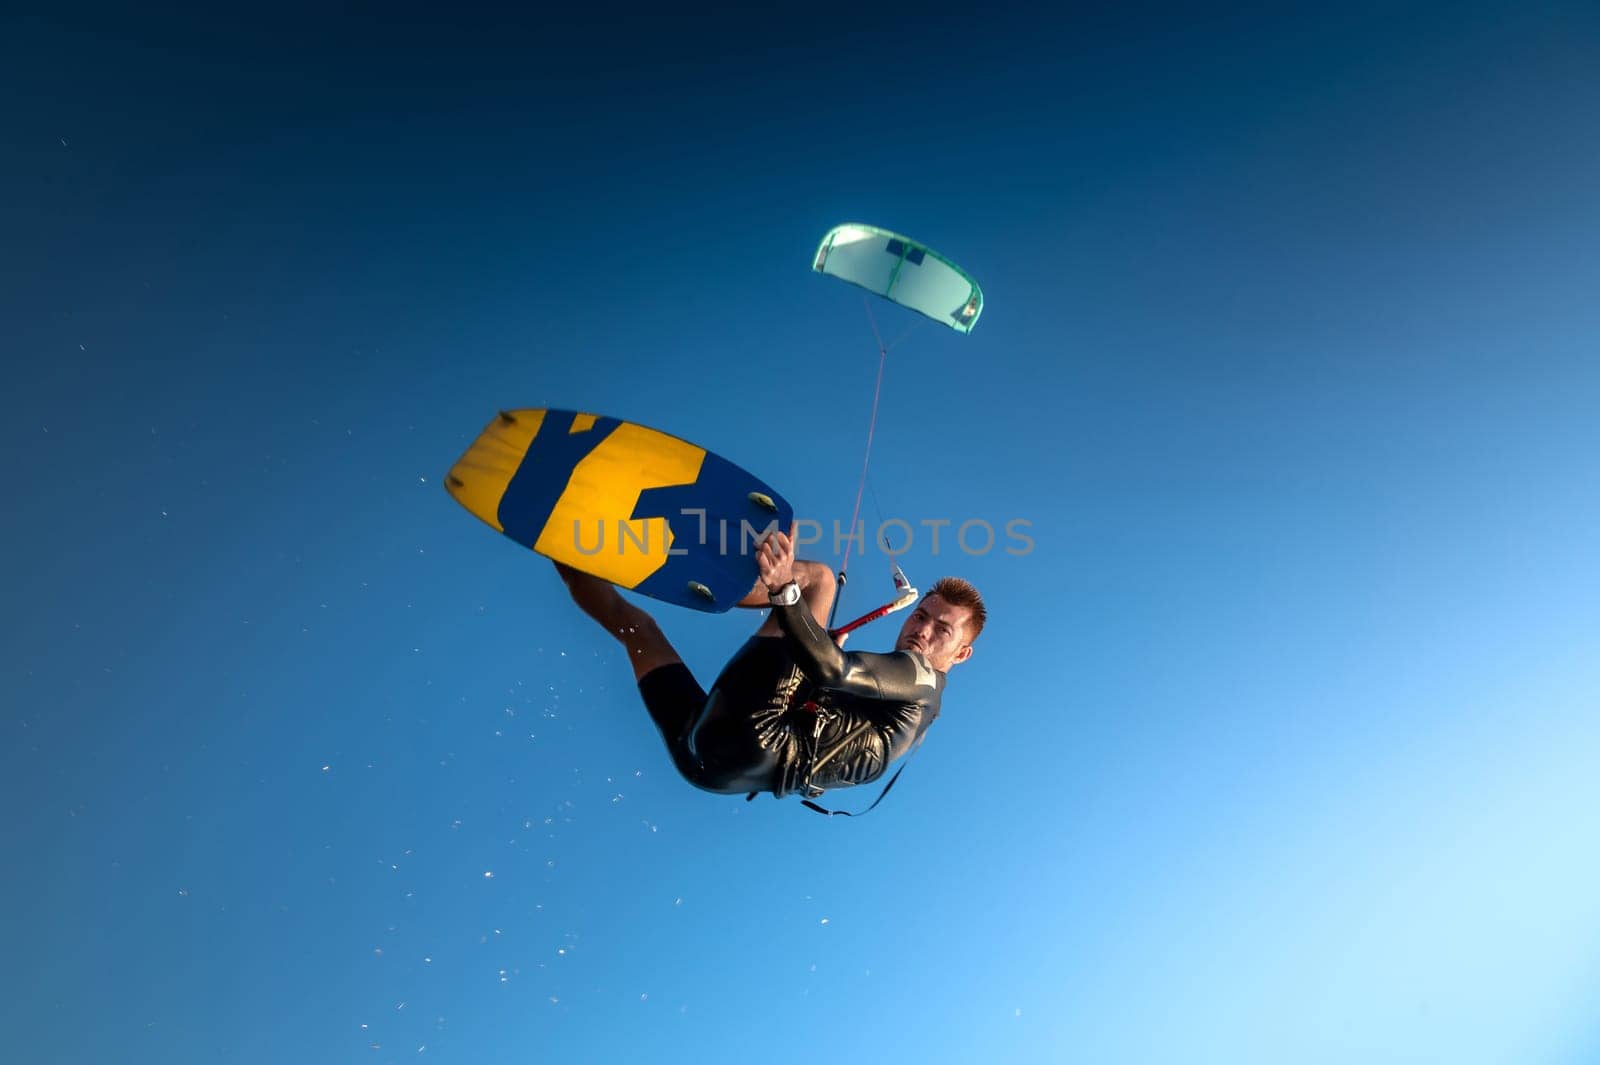 professional kiter performs a difficult trick against a beautiful blue sky background. Kitesurfing, Caucasian young man jump among clear sky by yanik88